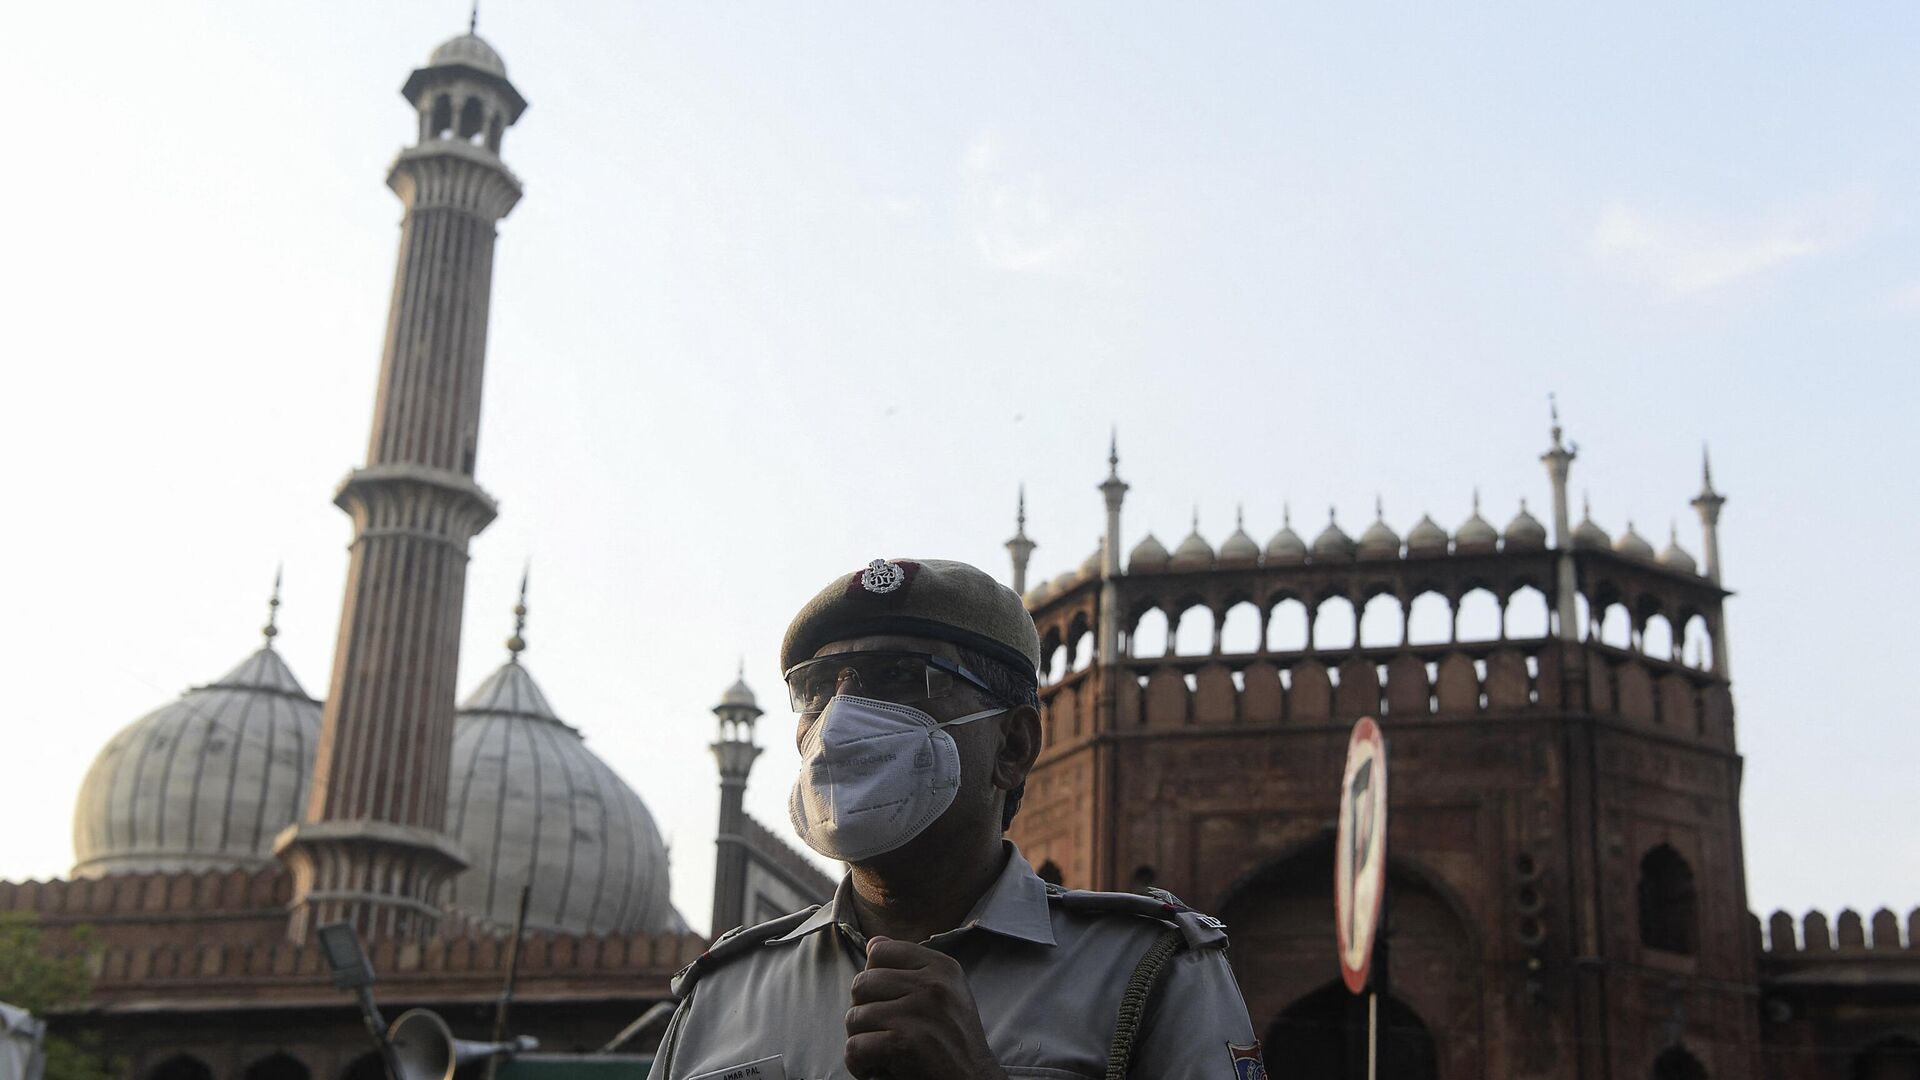 A police officer stands guard outside Jama Masjid during a government-imposed nationwide lockdown as a preventive measure against the spread of the COVID-19 coronavirus, in the old quarters of New Delhi on April 25, 2020. (Photo by SAJJAD HUSSAIN / AFP) - Sputnik India, 1920, 10.01.2023